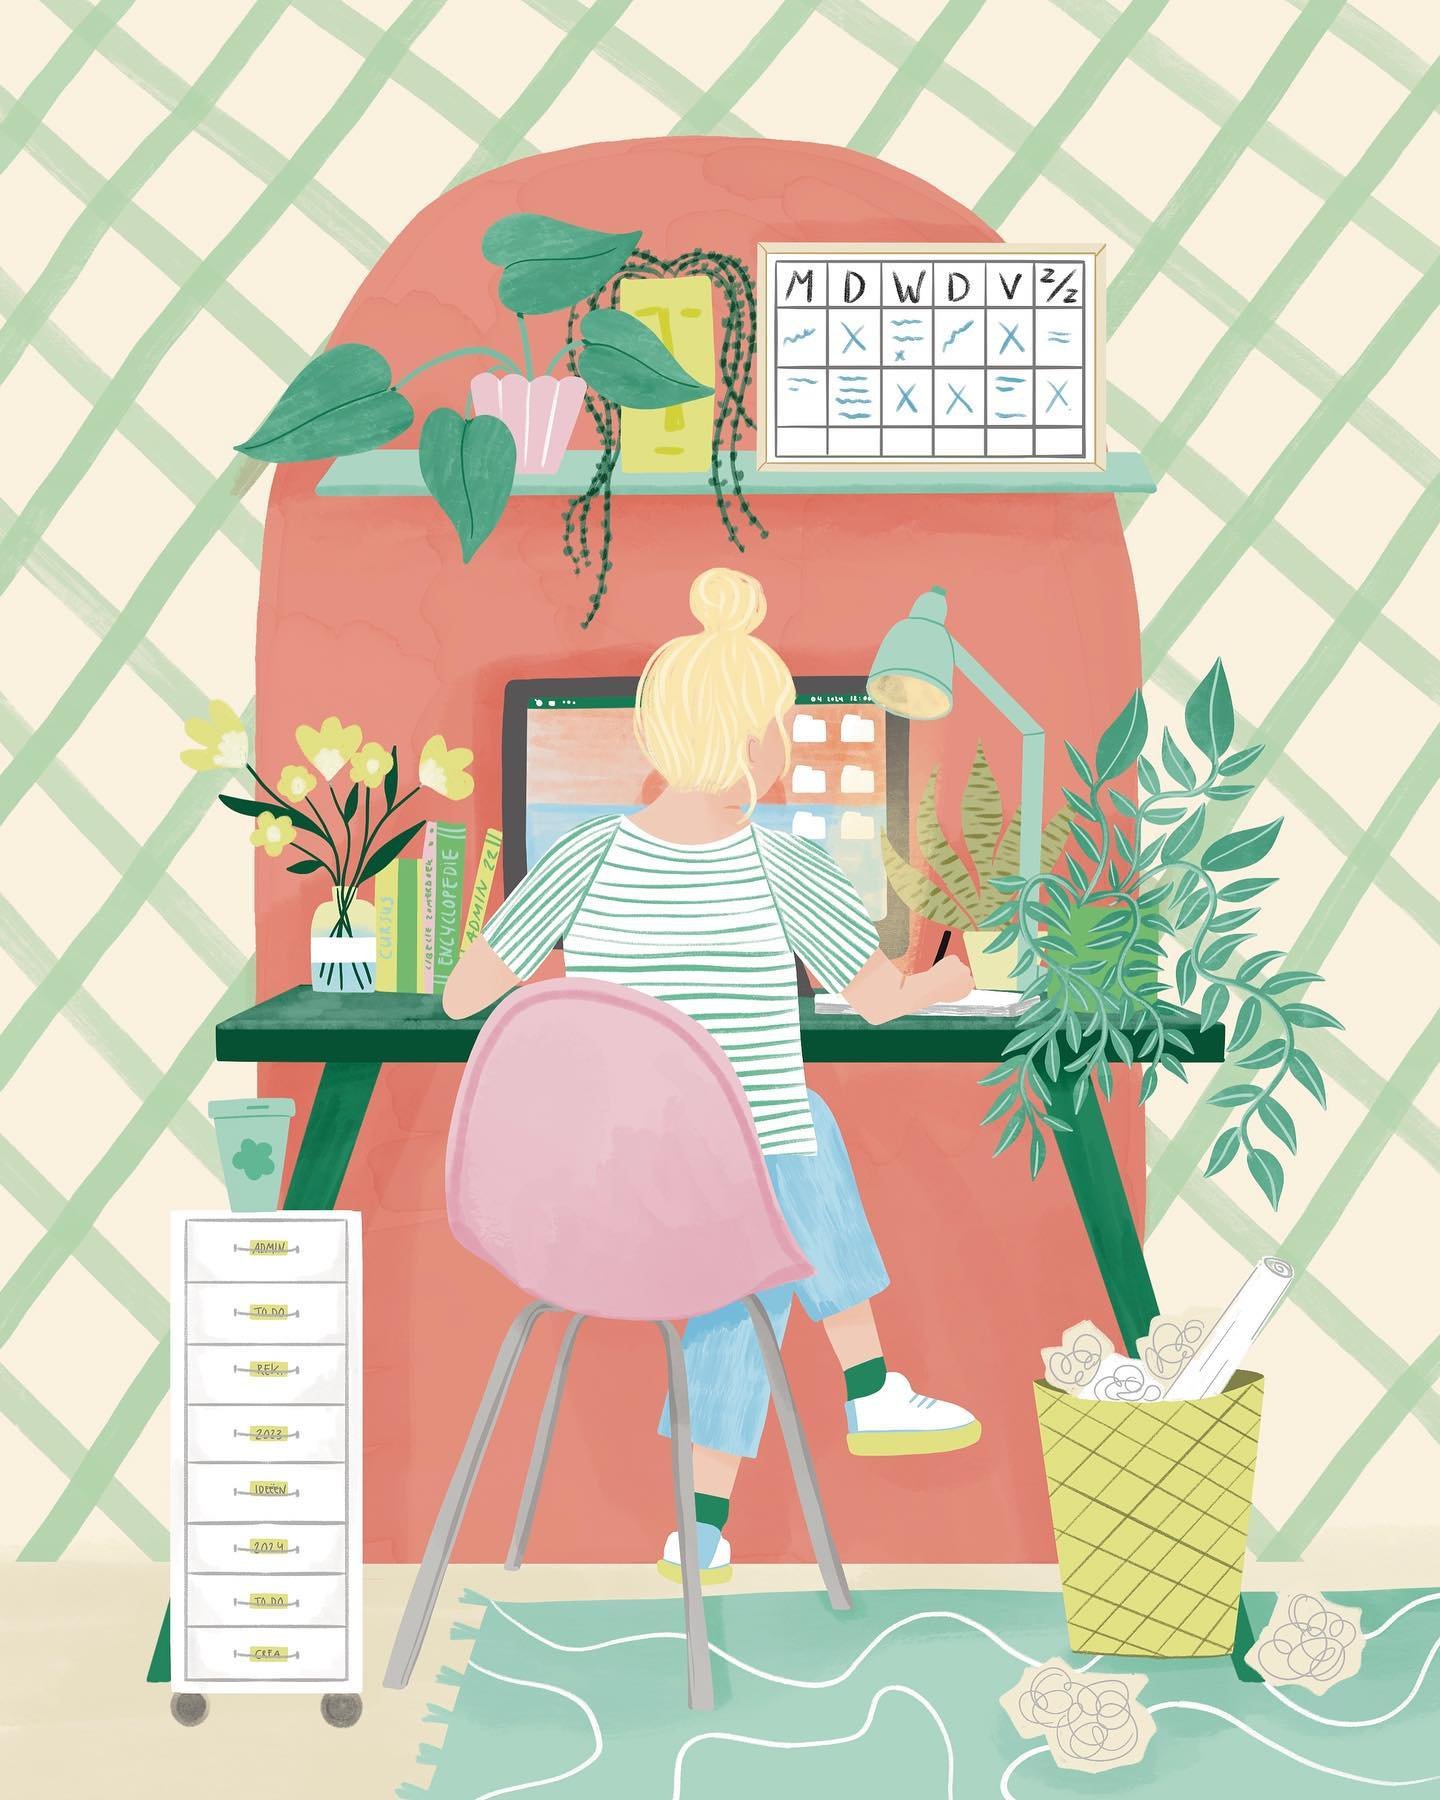 I&rsquo;m enjoying making lots of fun magazine editorials lately. This one was for @libellebelgie about finding a workplace where you&rsquo;re happy. 

#editorialillustration #magazineeditorial #editorialdesign